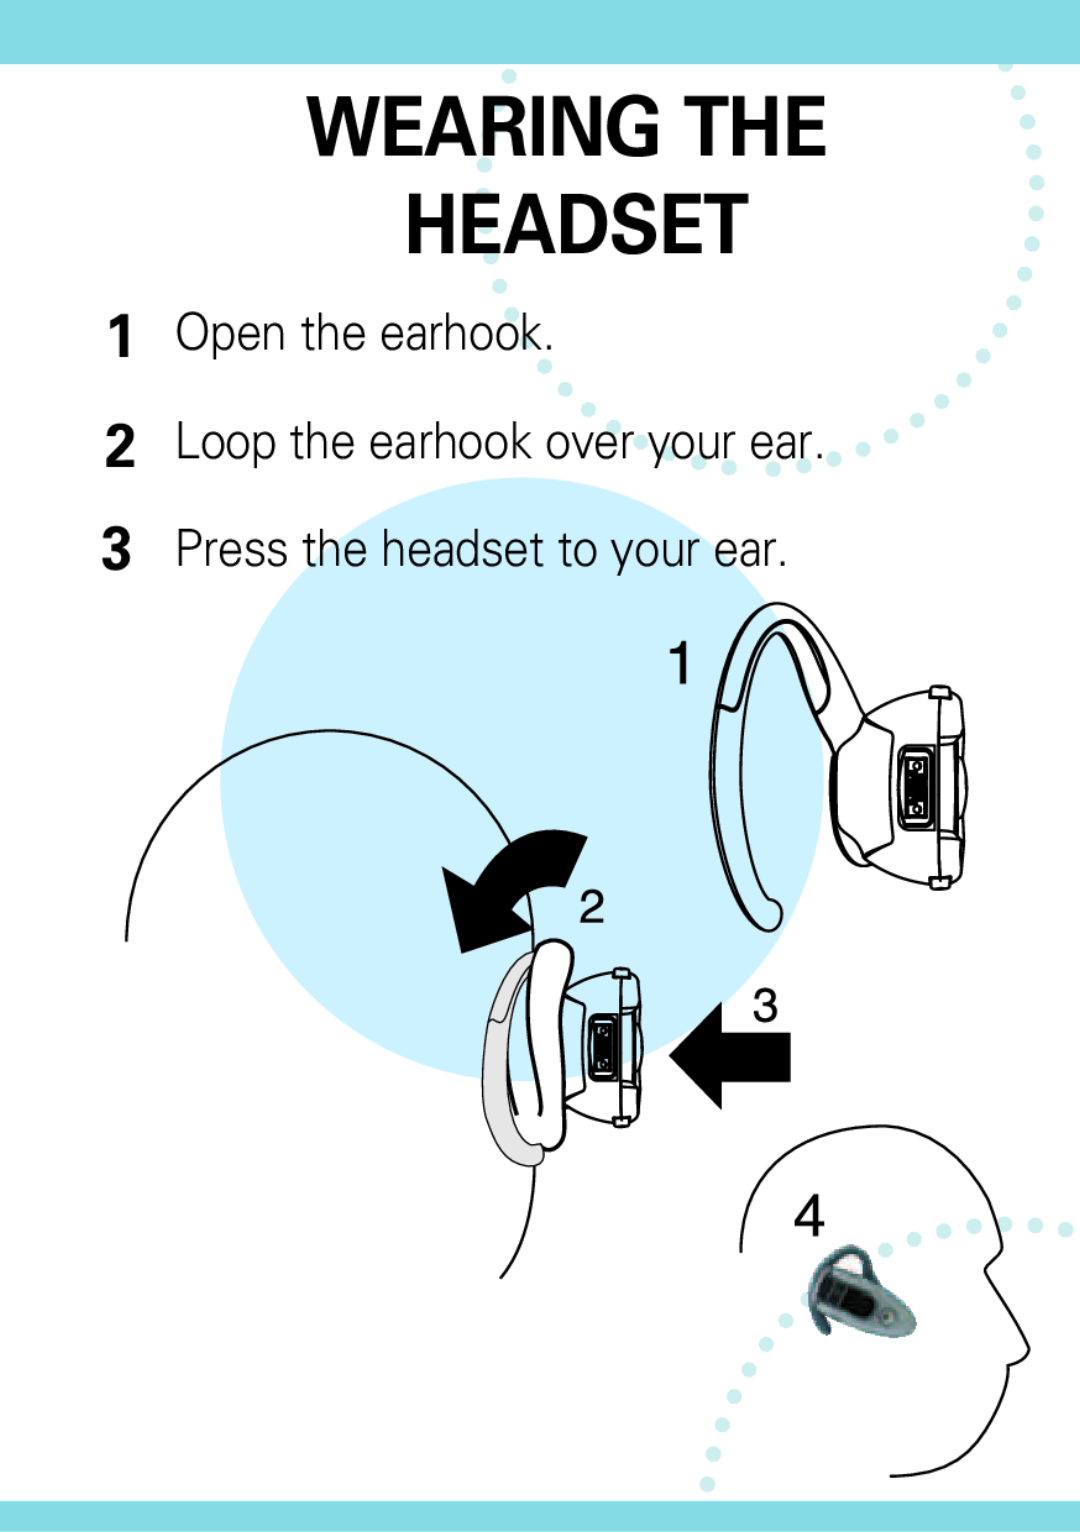 Motorola H500 manual Wearing The Headset, 1Open the earhook 2Loop the earhook over your ear, 3Press the headset to your ear 